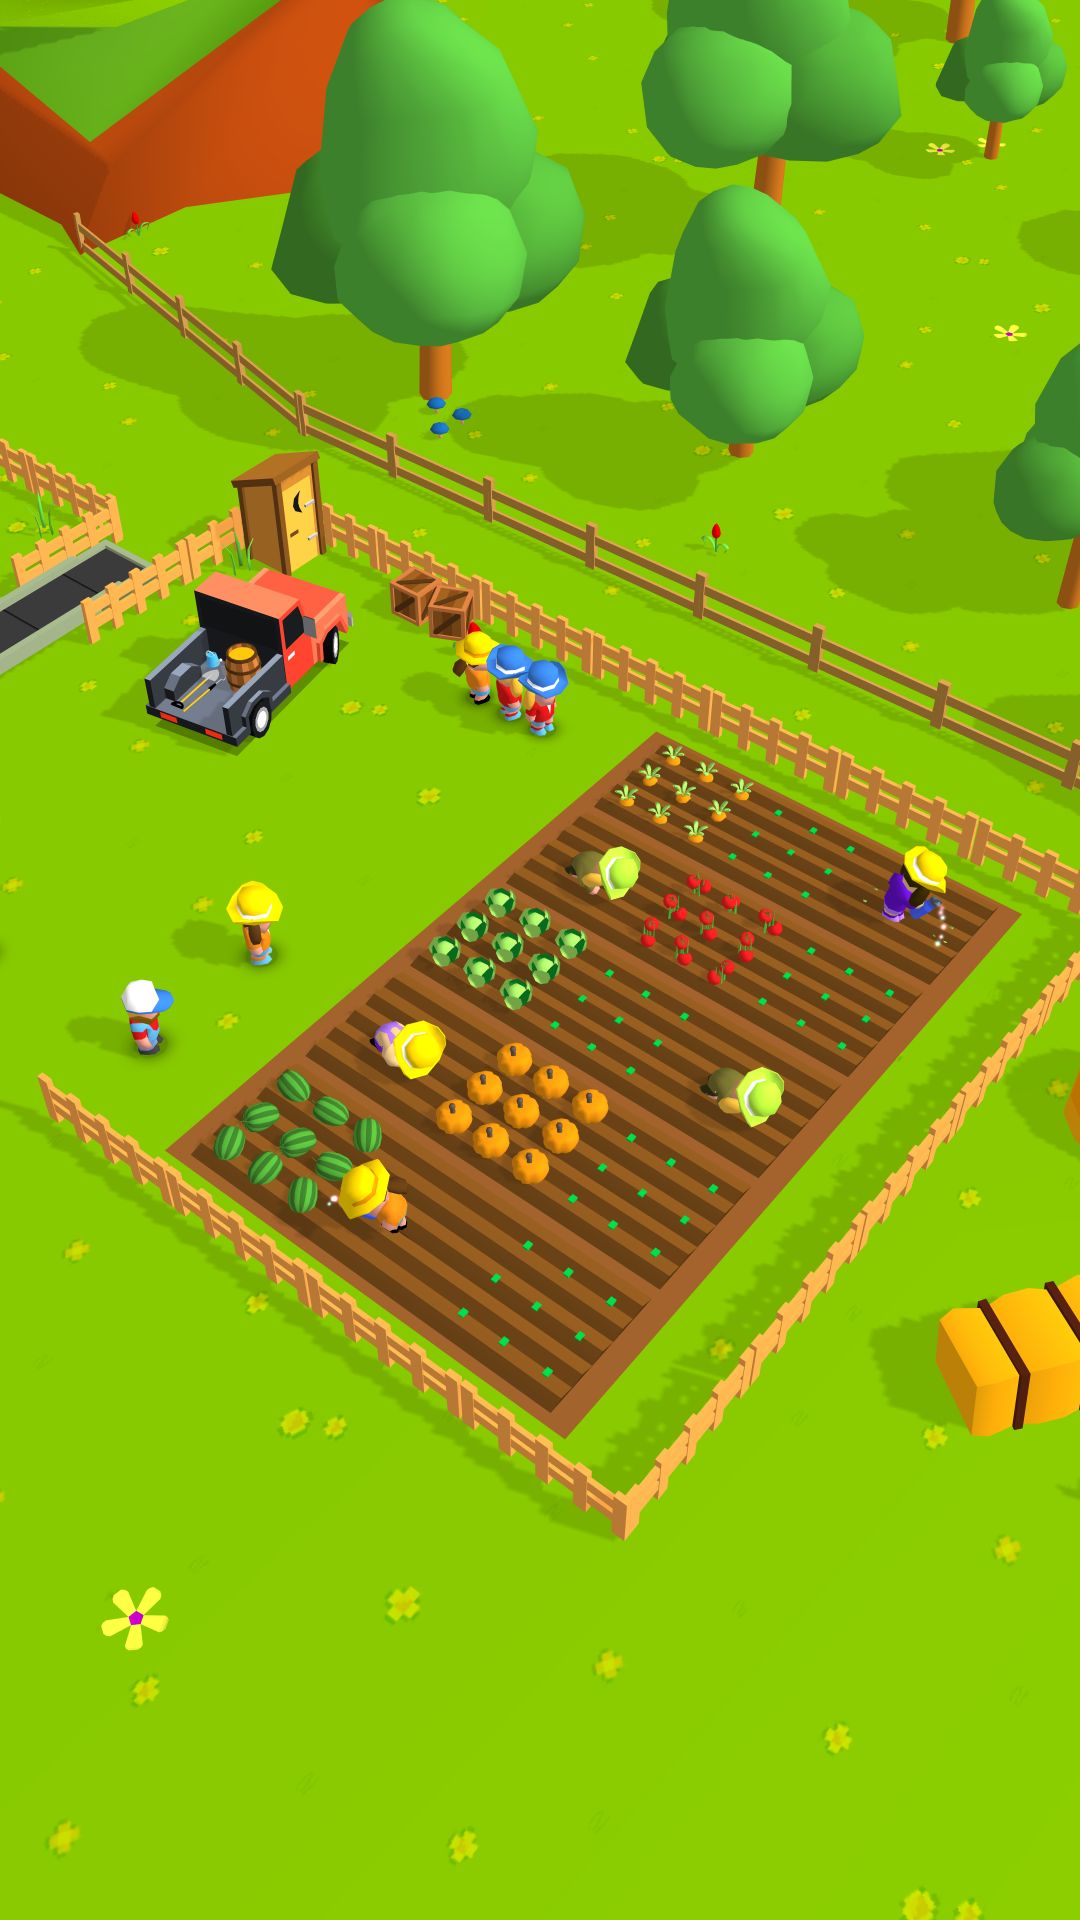 Gameplay of the Farm: Idle Empire Tycoon for Android phone or tablet.